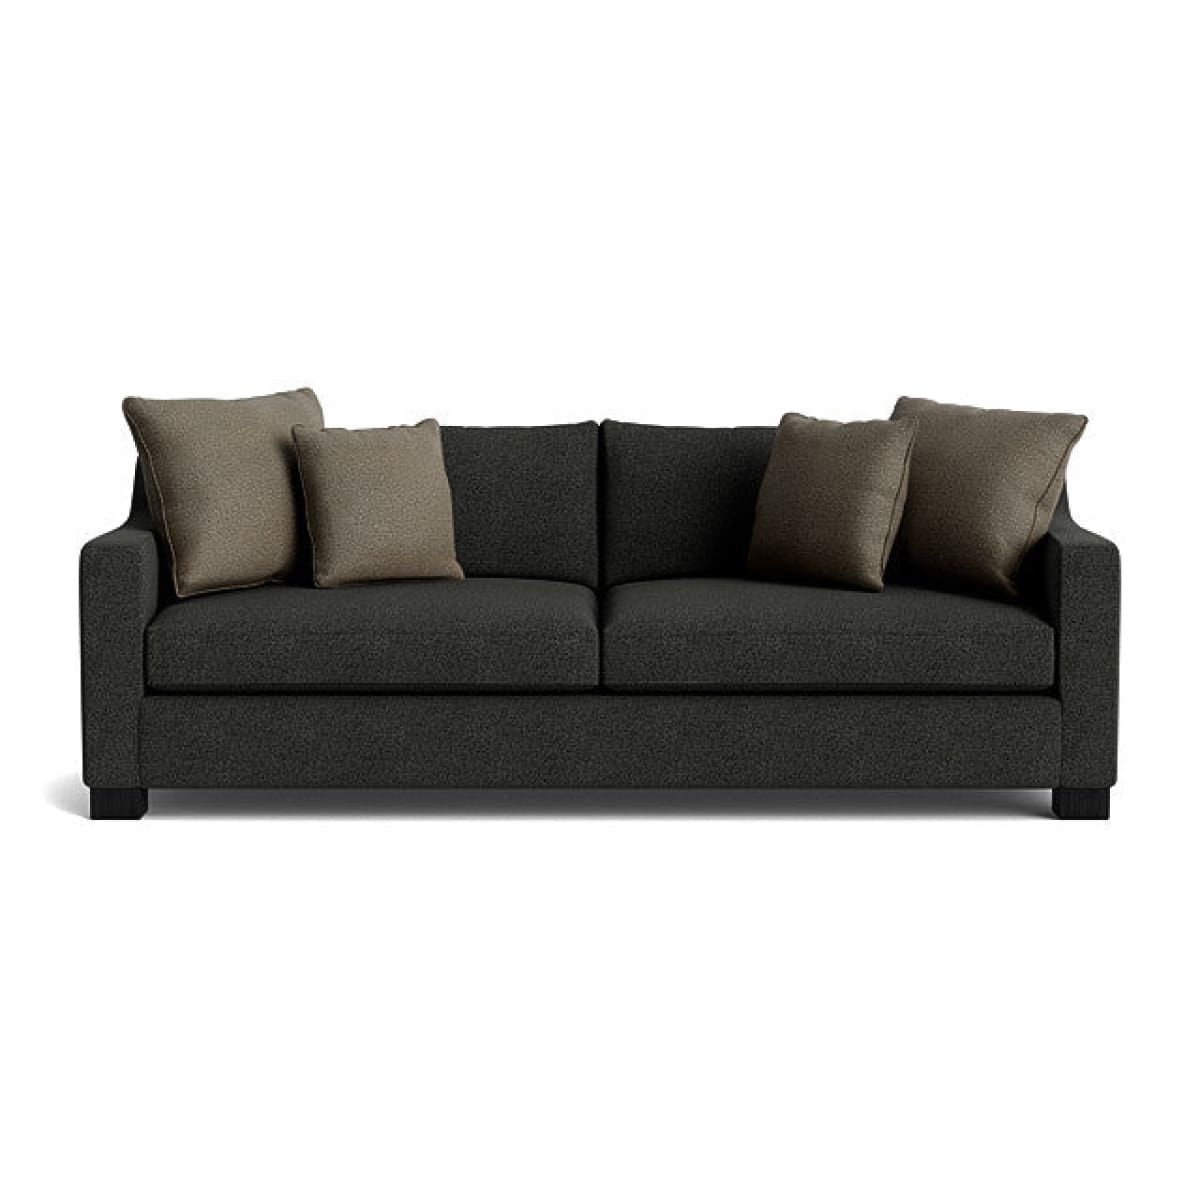 Ewing Sofa - Sectional - Aiden Storm